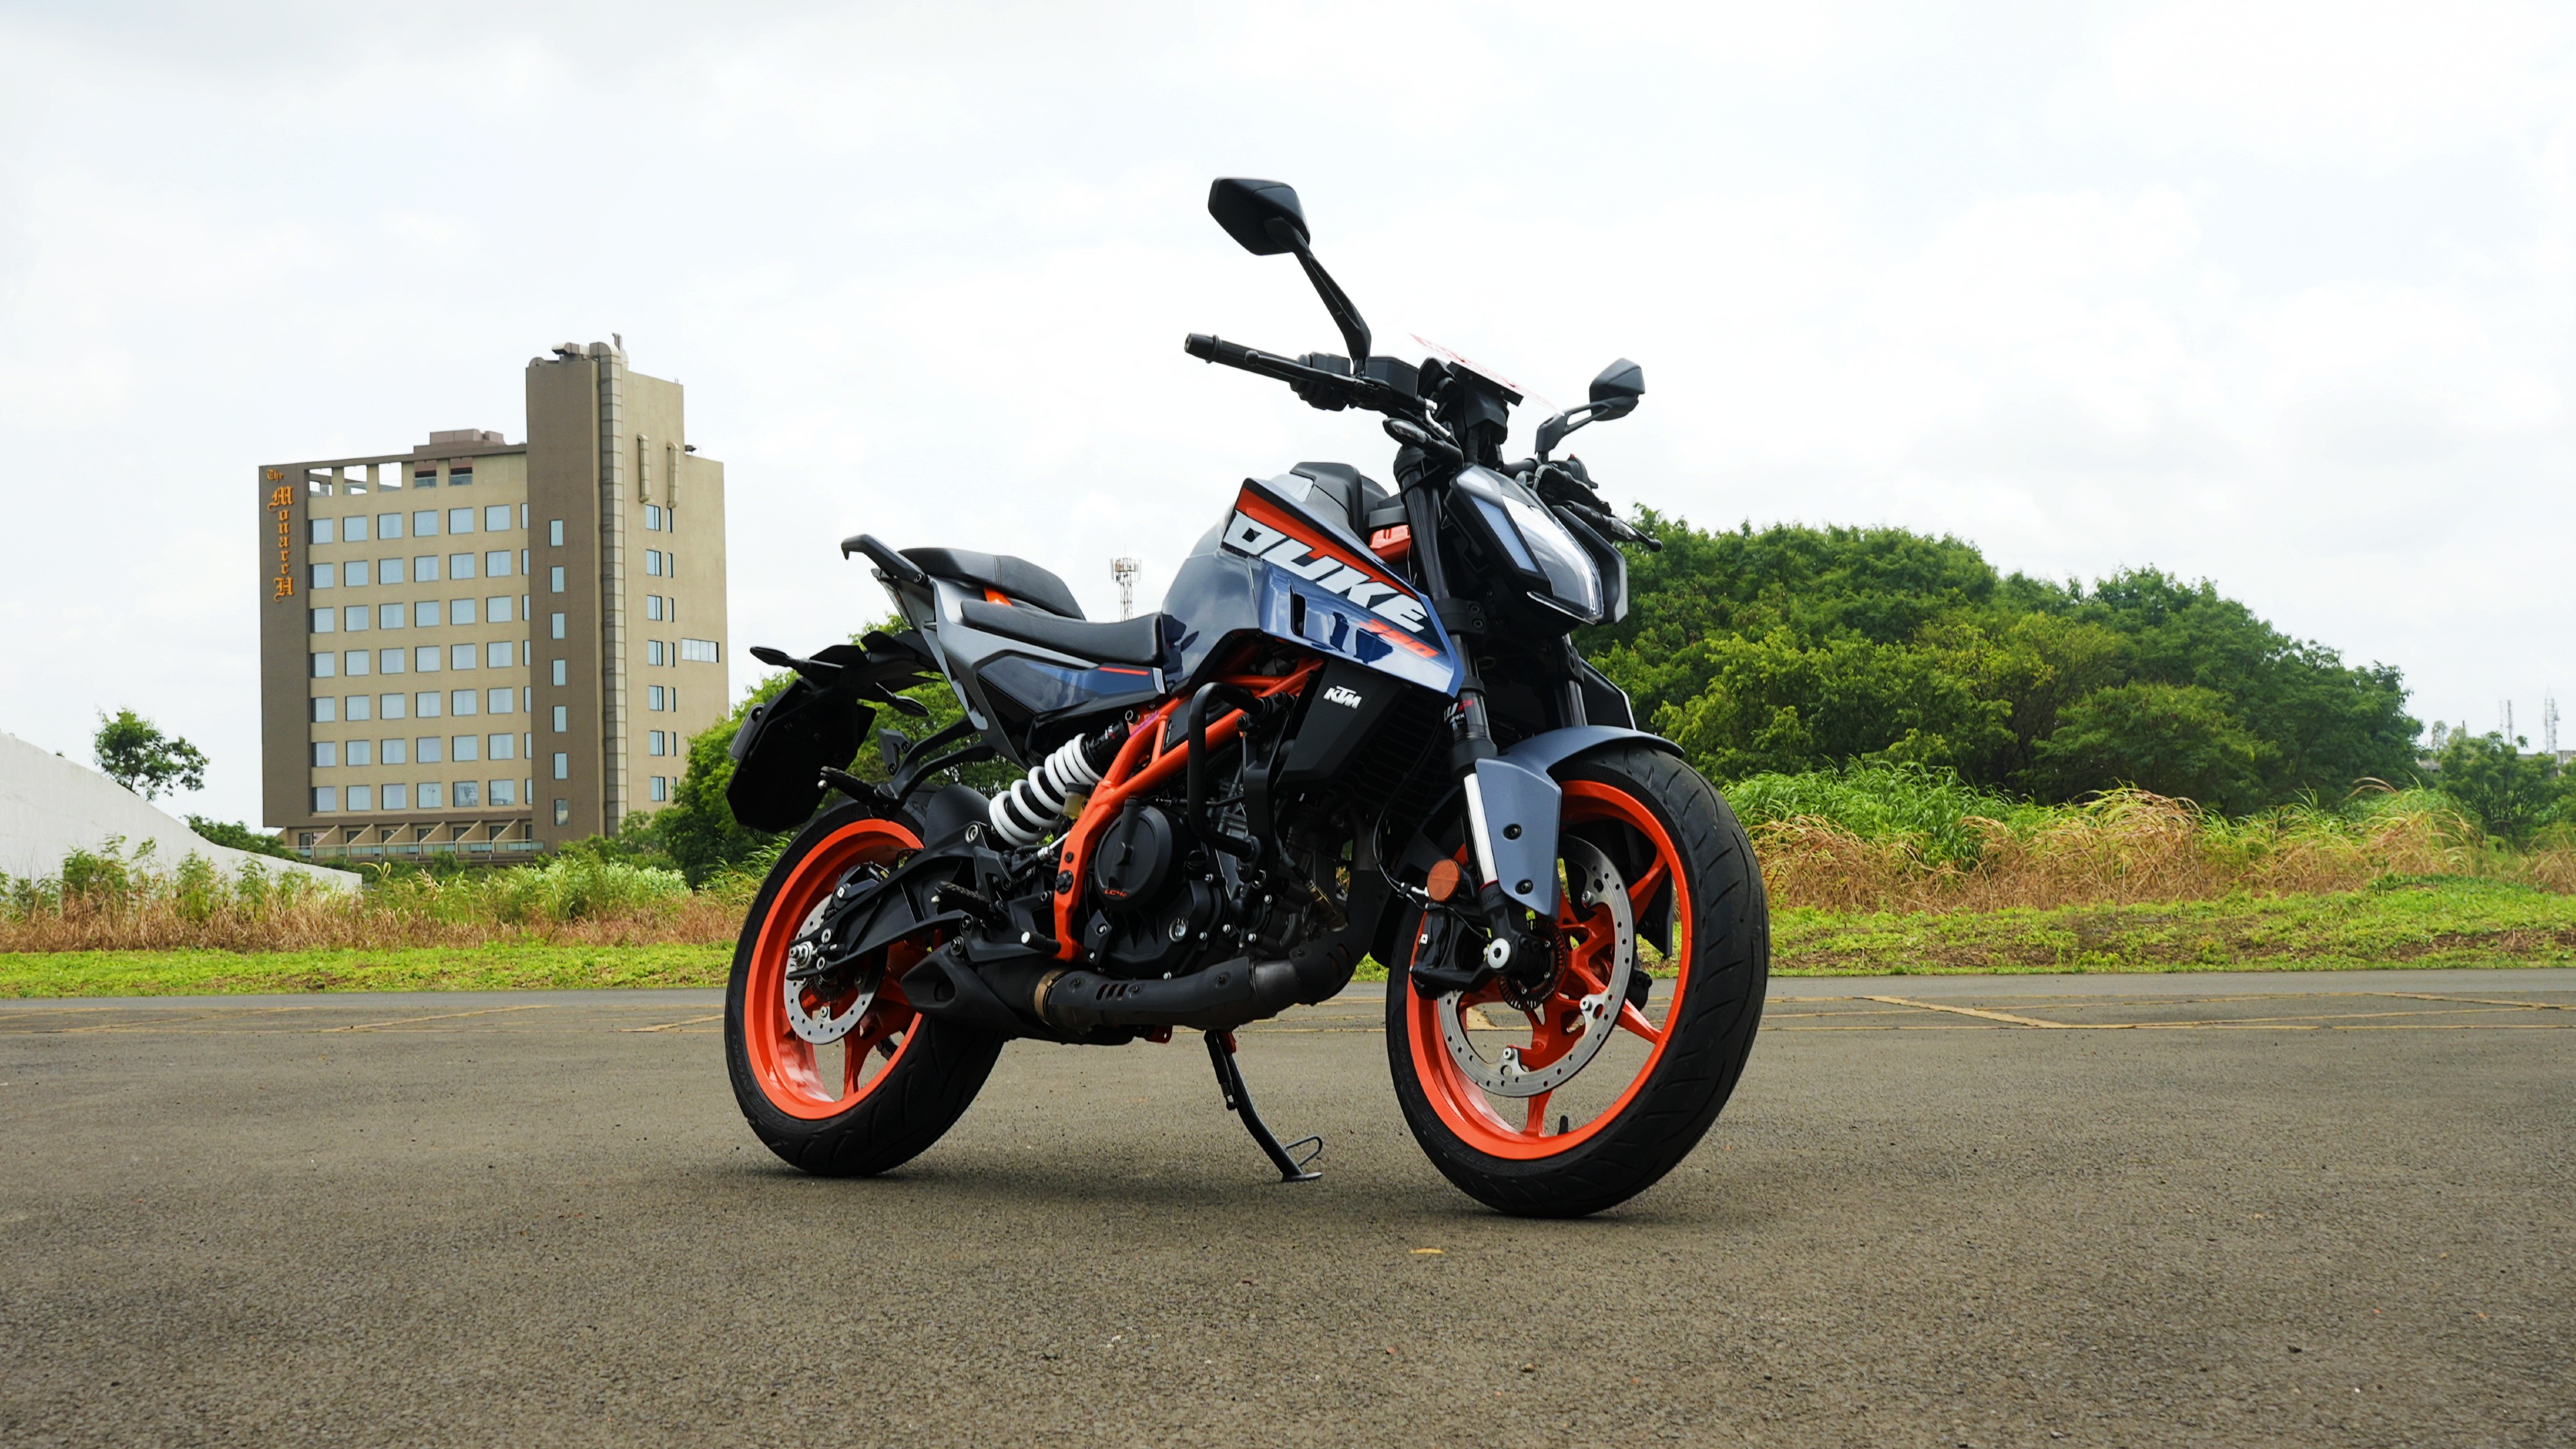 The 2024 KTM 390 Duke looks sharp, mimicking the bigger Duke range in design. The road presence remains strong with the bold styling